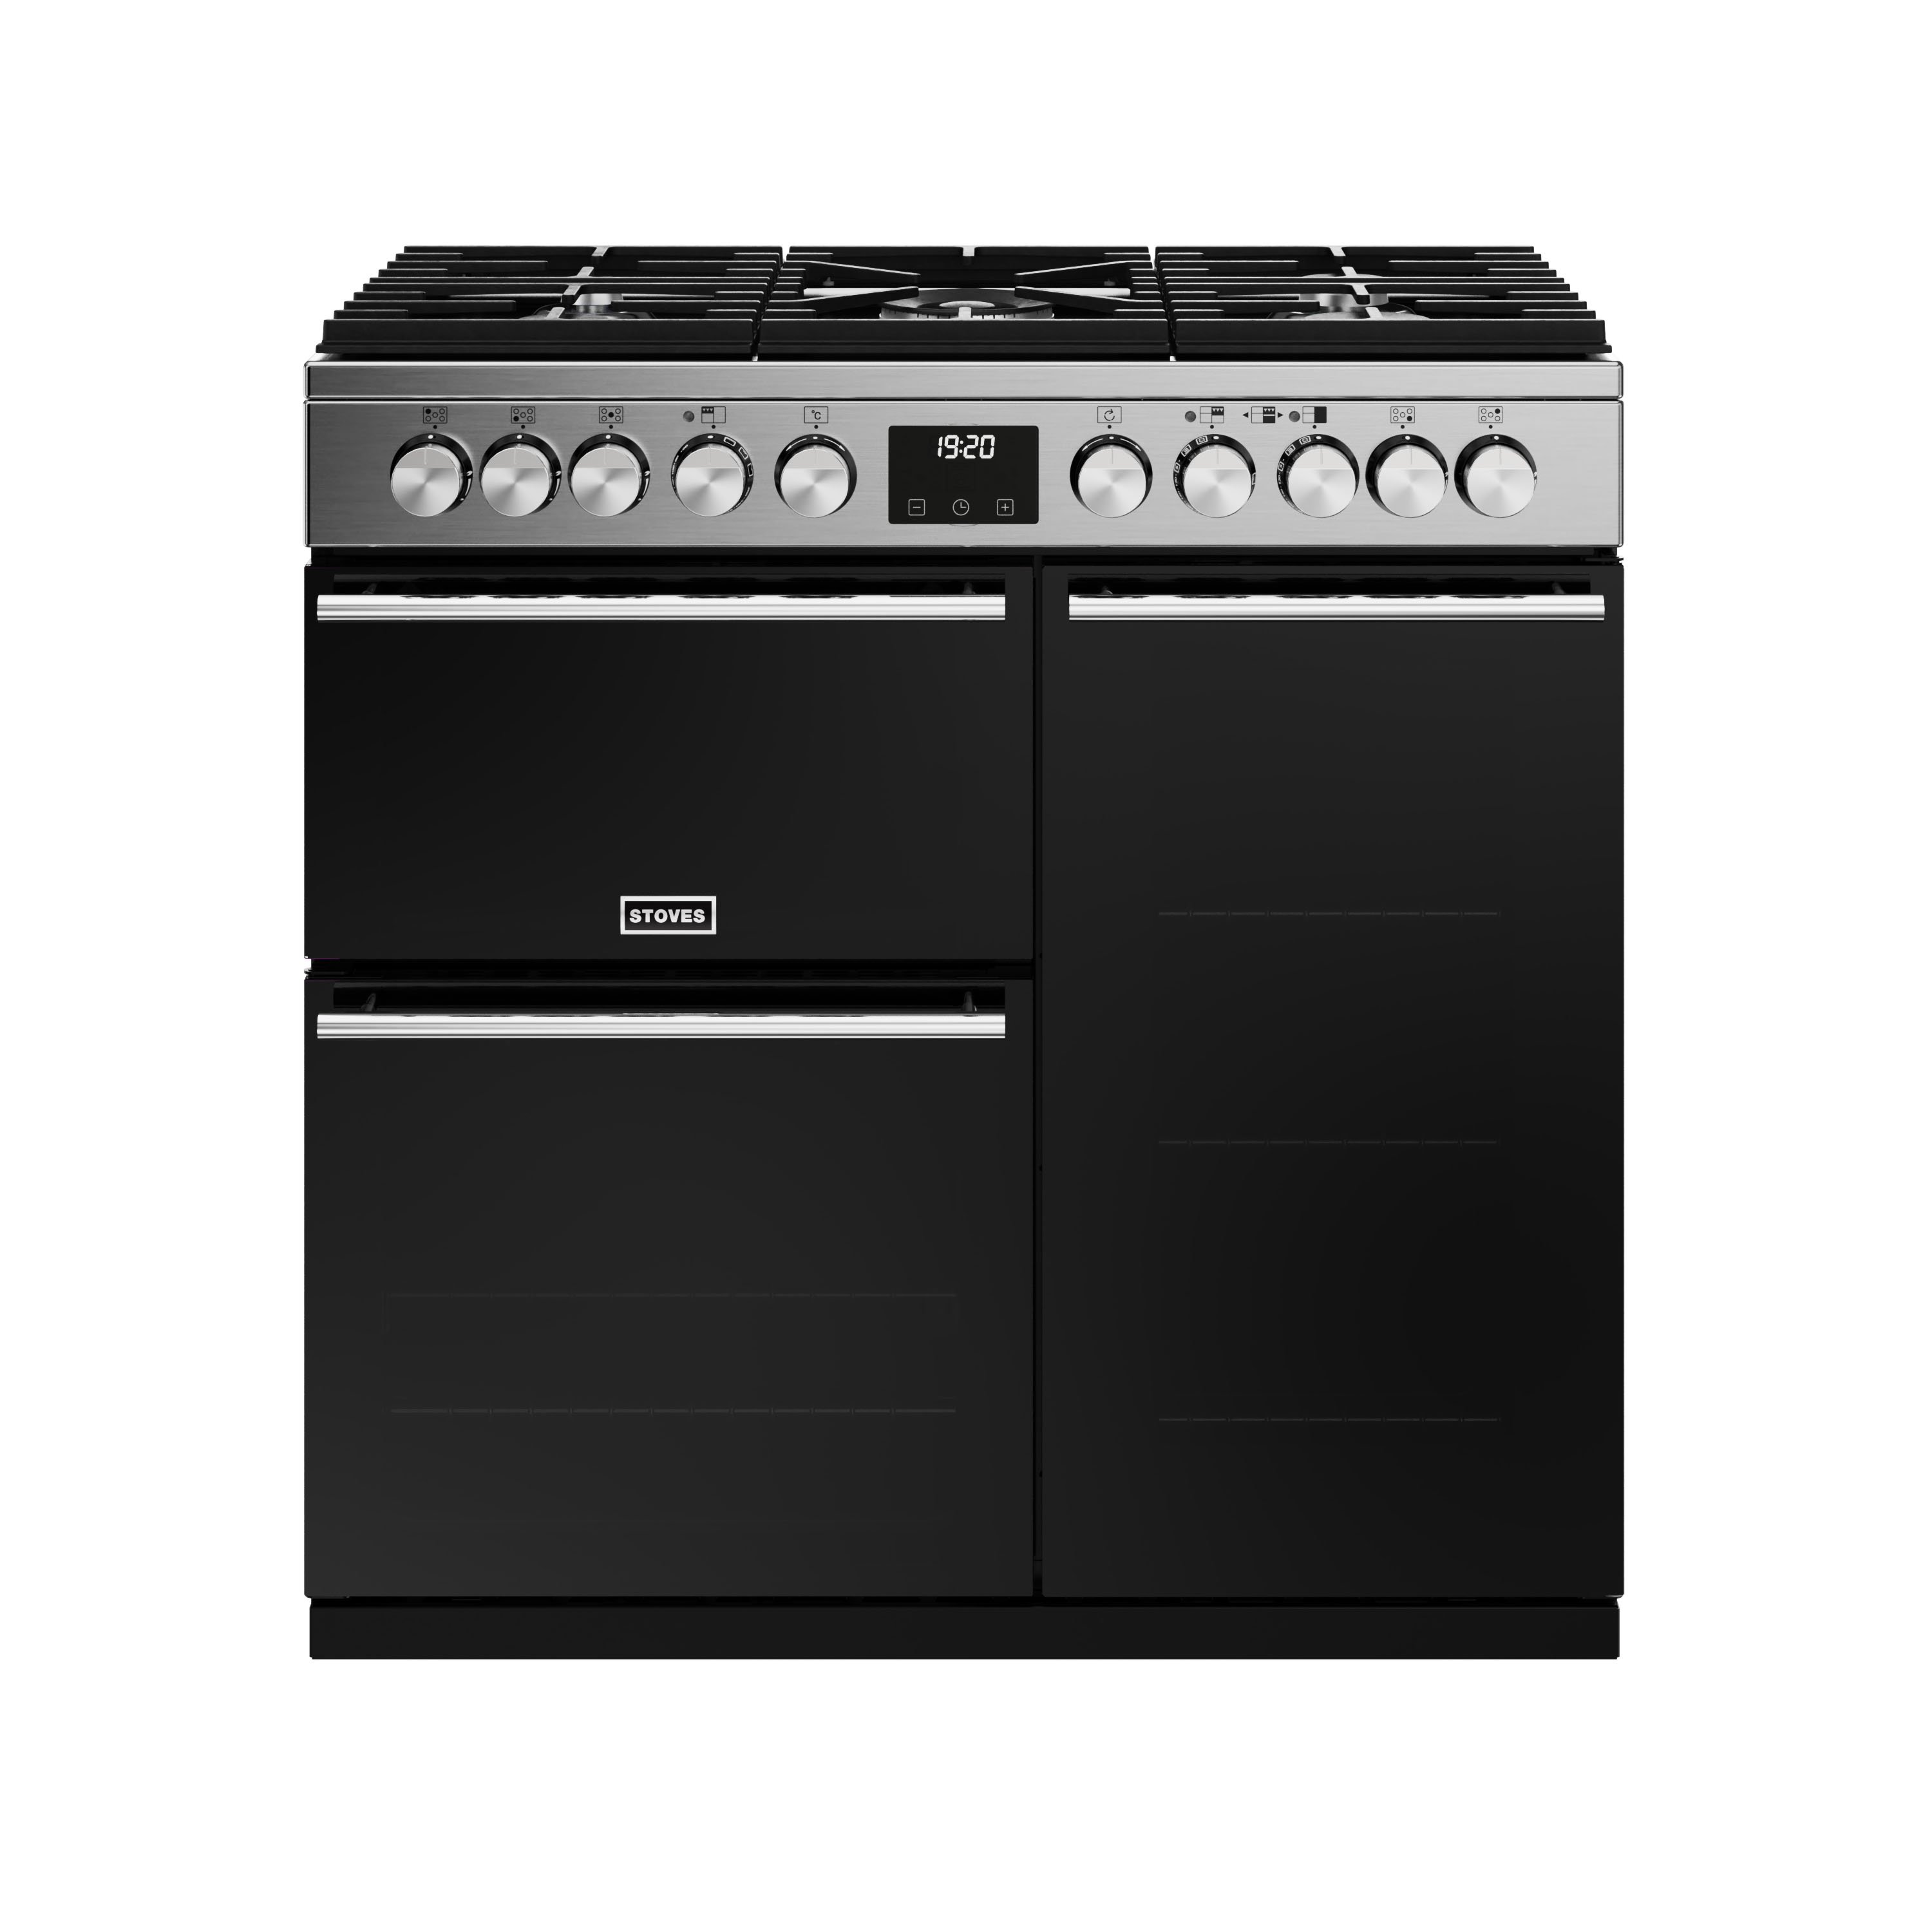 90cm dual fuel range cooker with a 5 burner gas hob, conventional oven & grill, multifunction main oven with TrueTemp digital thermostat, and tall fanned oven with PROFLEX™